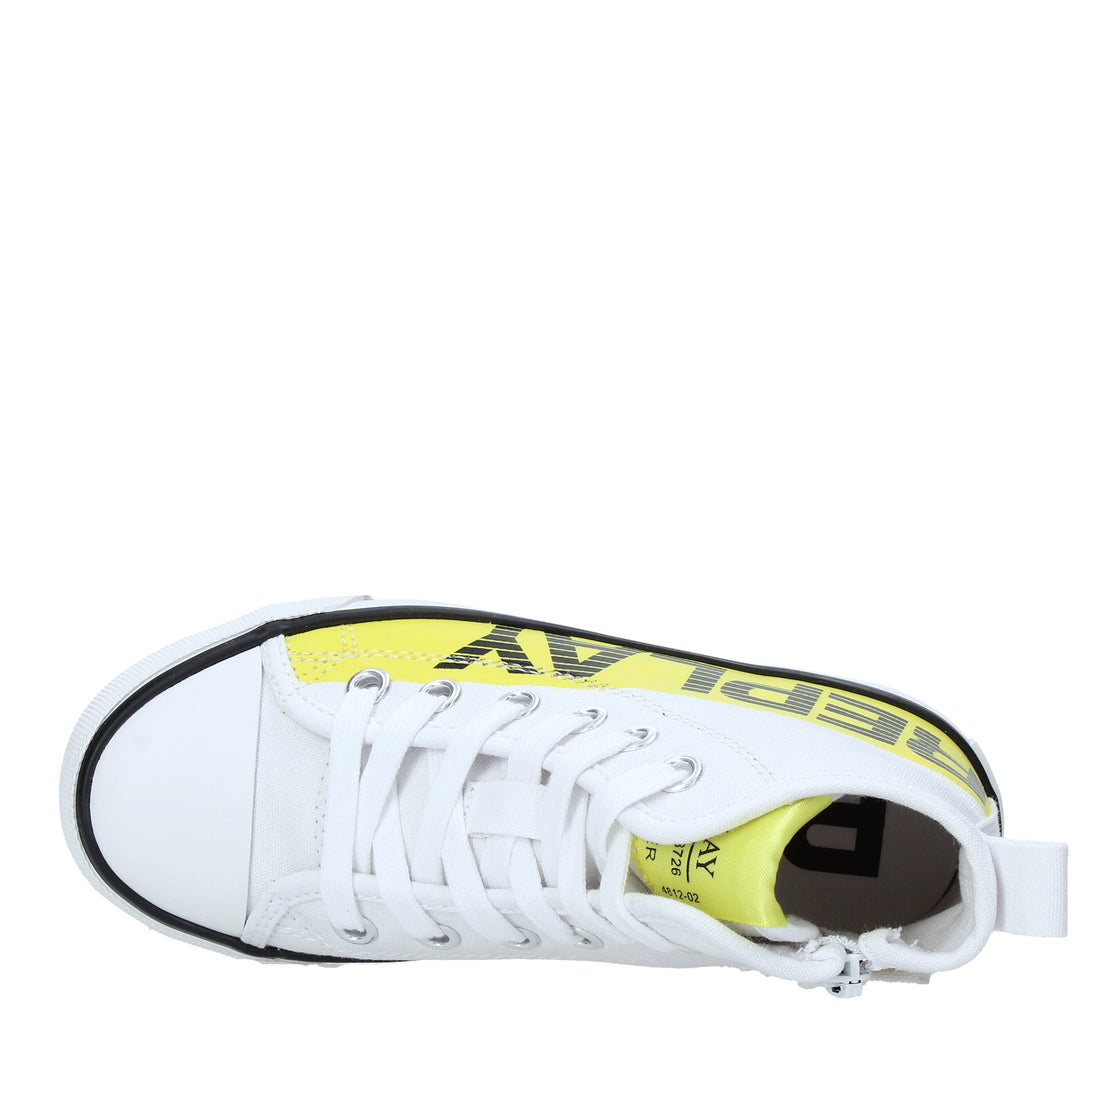 Sneakers Bianco Replay&sons